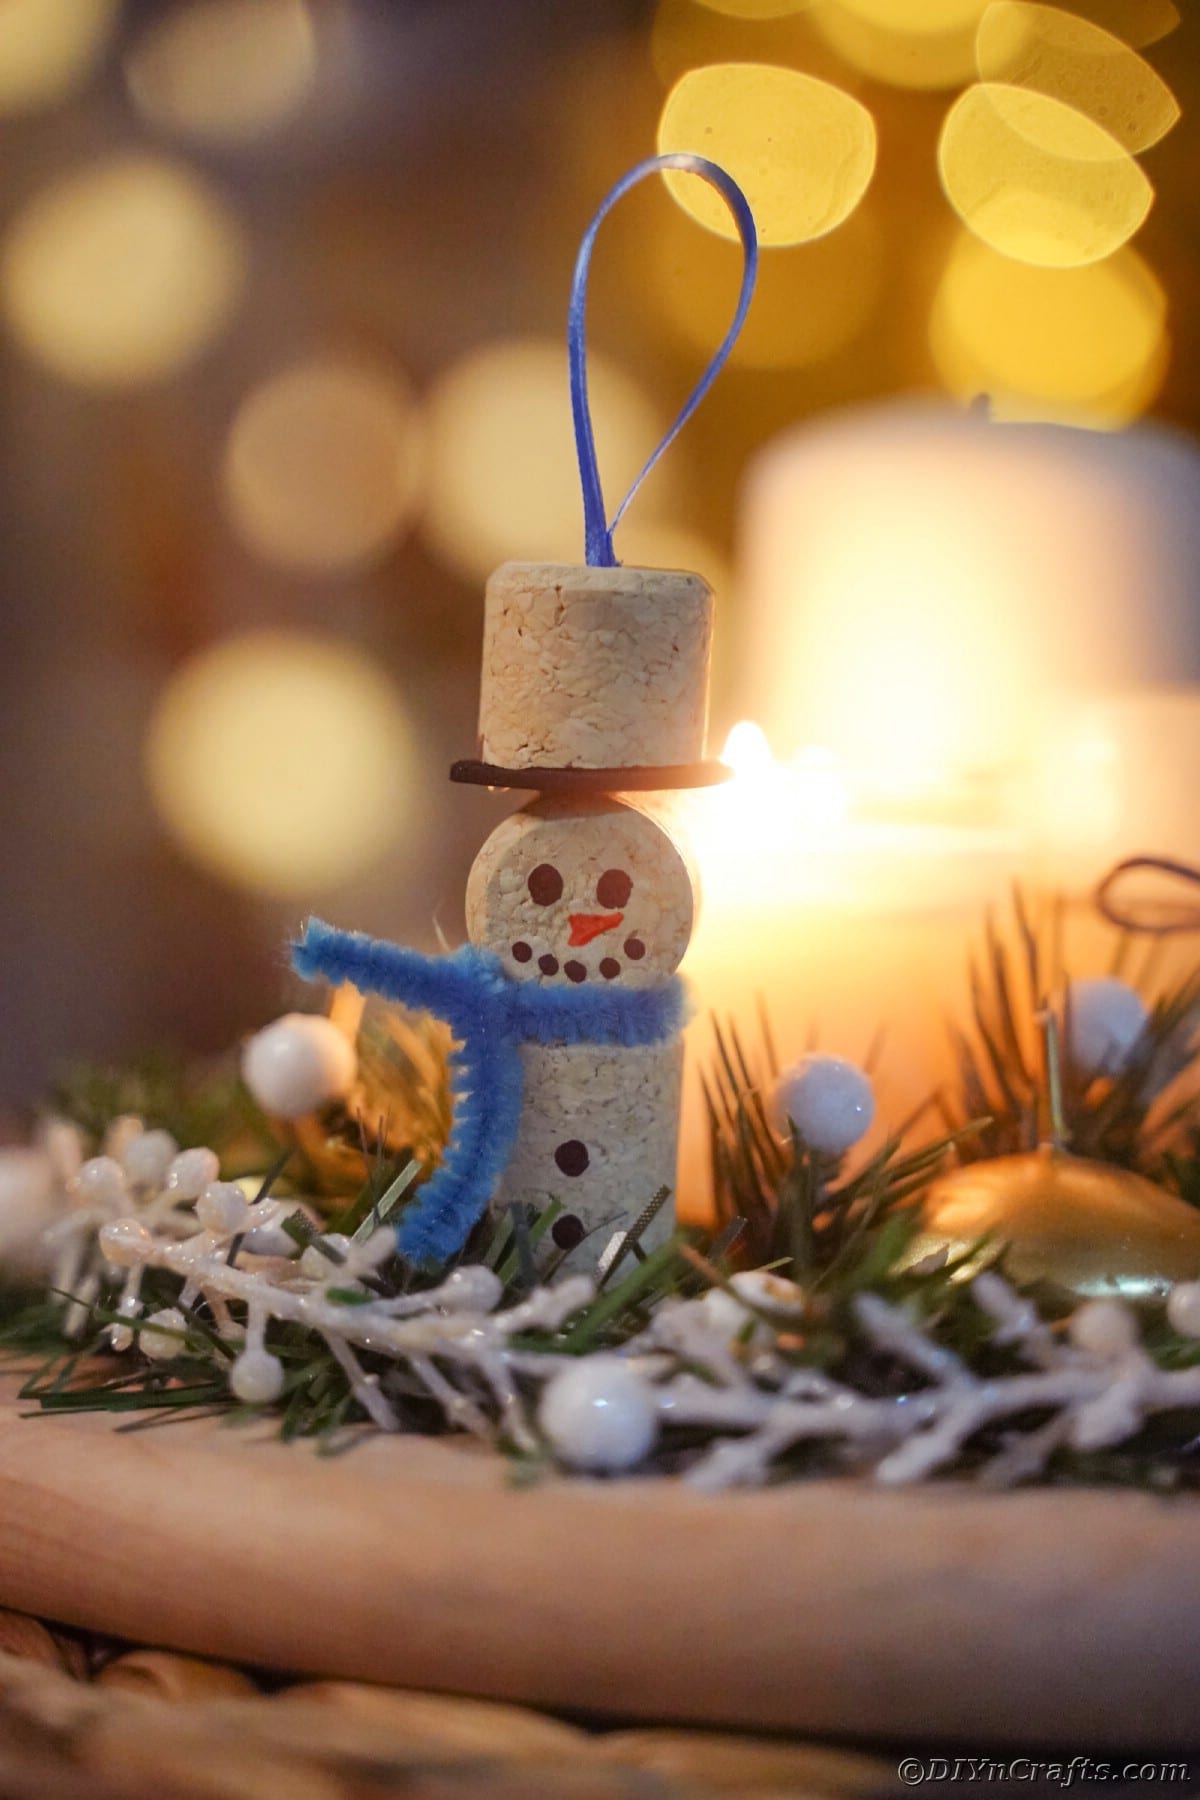 wine cork snowman with blue scarf hanging on tree by white fake berries